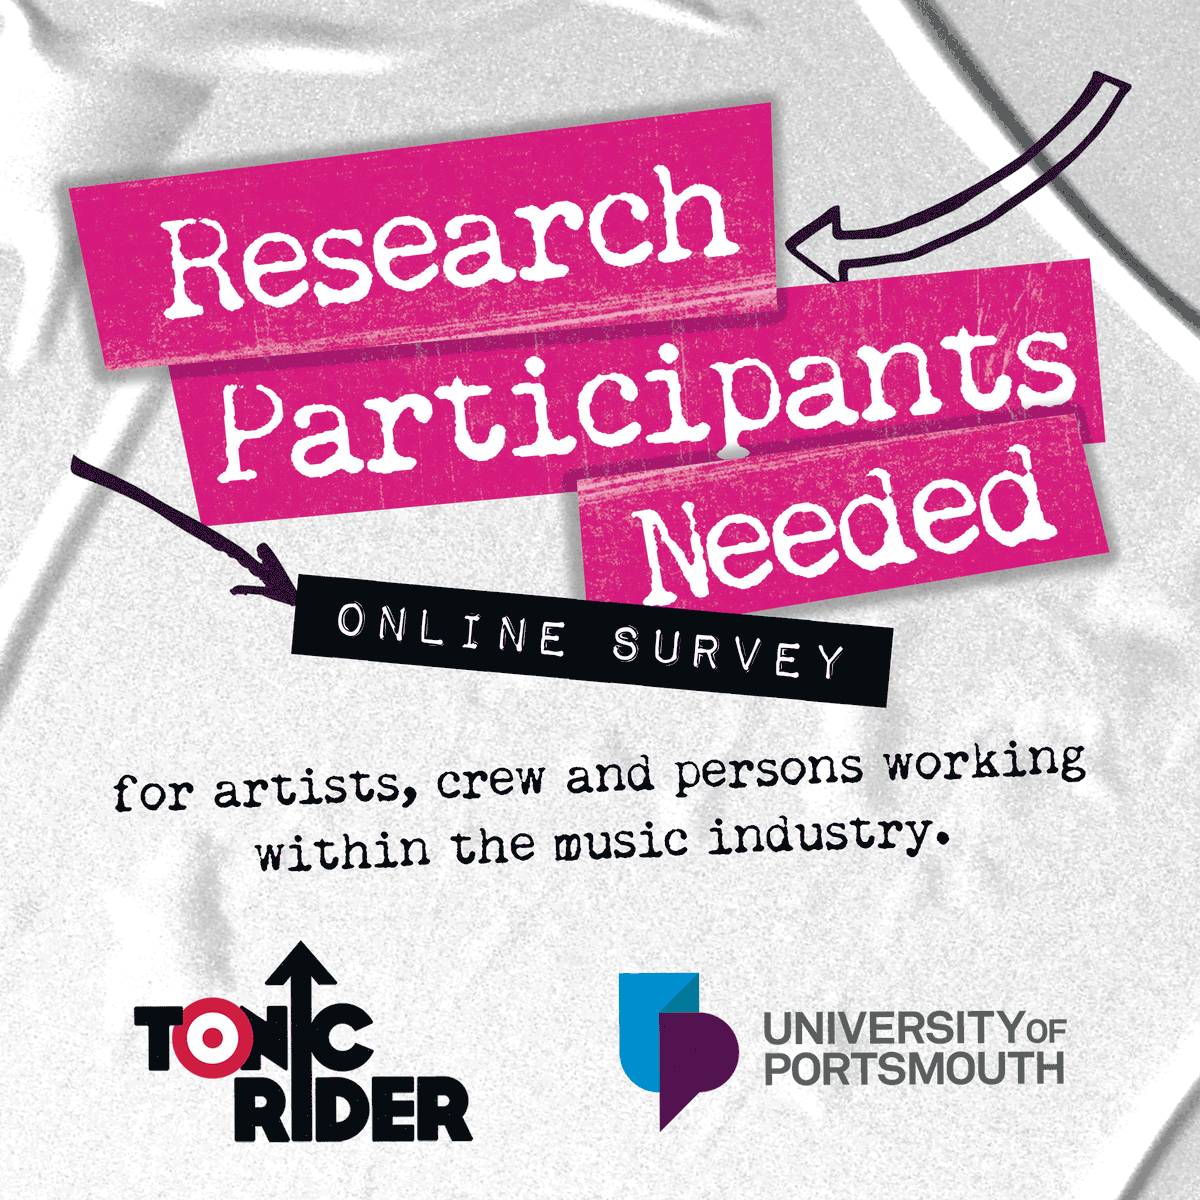 Calling all artists, crew and industry professionals!

Survey on mental health in the music industry - with @portsmouthuni

To take part >  tonicmusic.co.uk/research 

#TonicRider #Research #MentalHealth #Wellbeing #Music